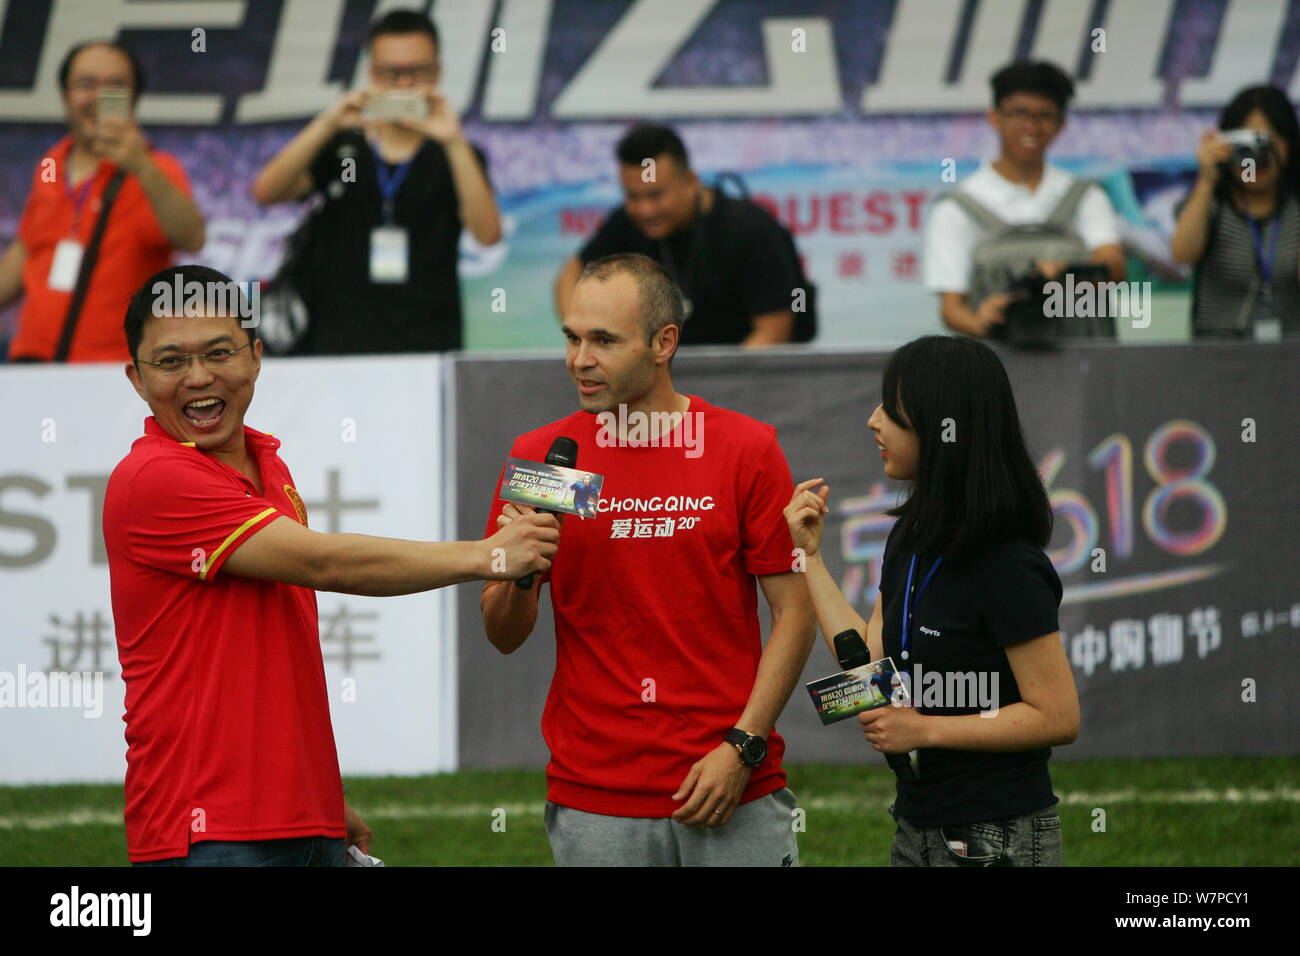 Spanish football player Andres Iniesta, center, attends a commercial event in Chongqing, China, 13 June 2017. Stock Photo